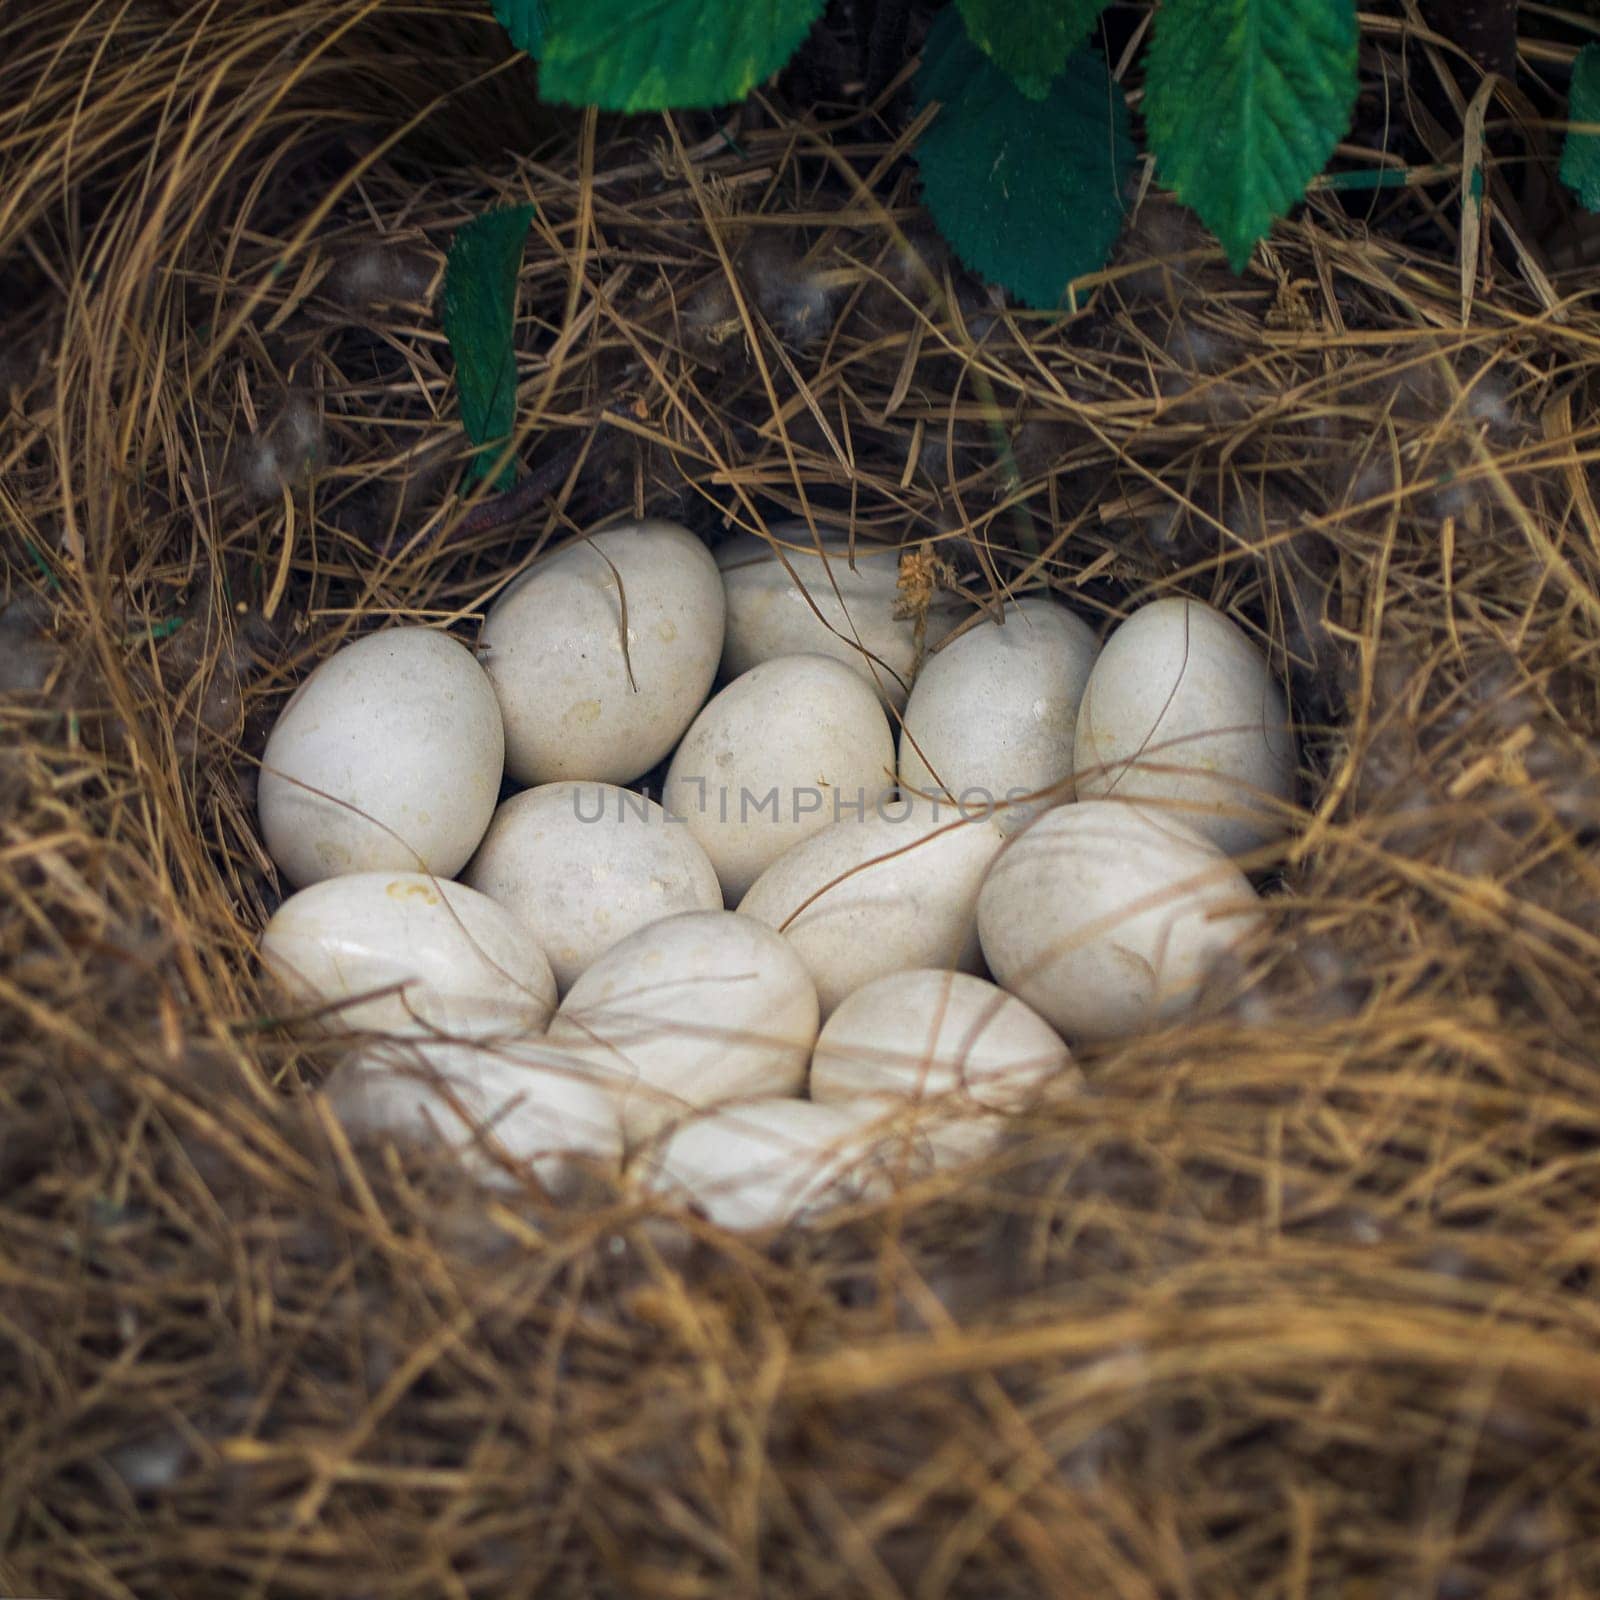 Chicken eggs is on chicken nest,it s made from straw , this nest is a natural chicken nest on a lot of small stones ,this image in natural and chicken eggs concept by Andre1ns